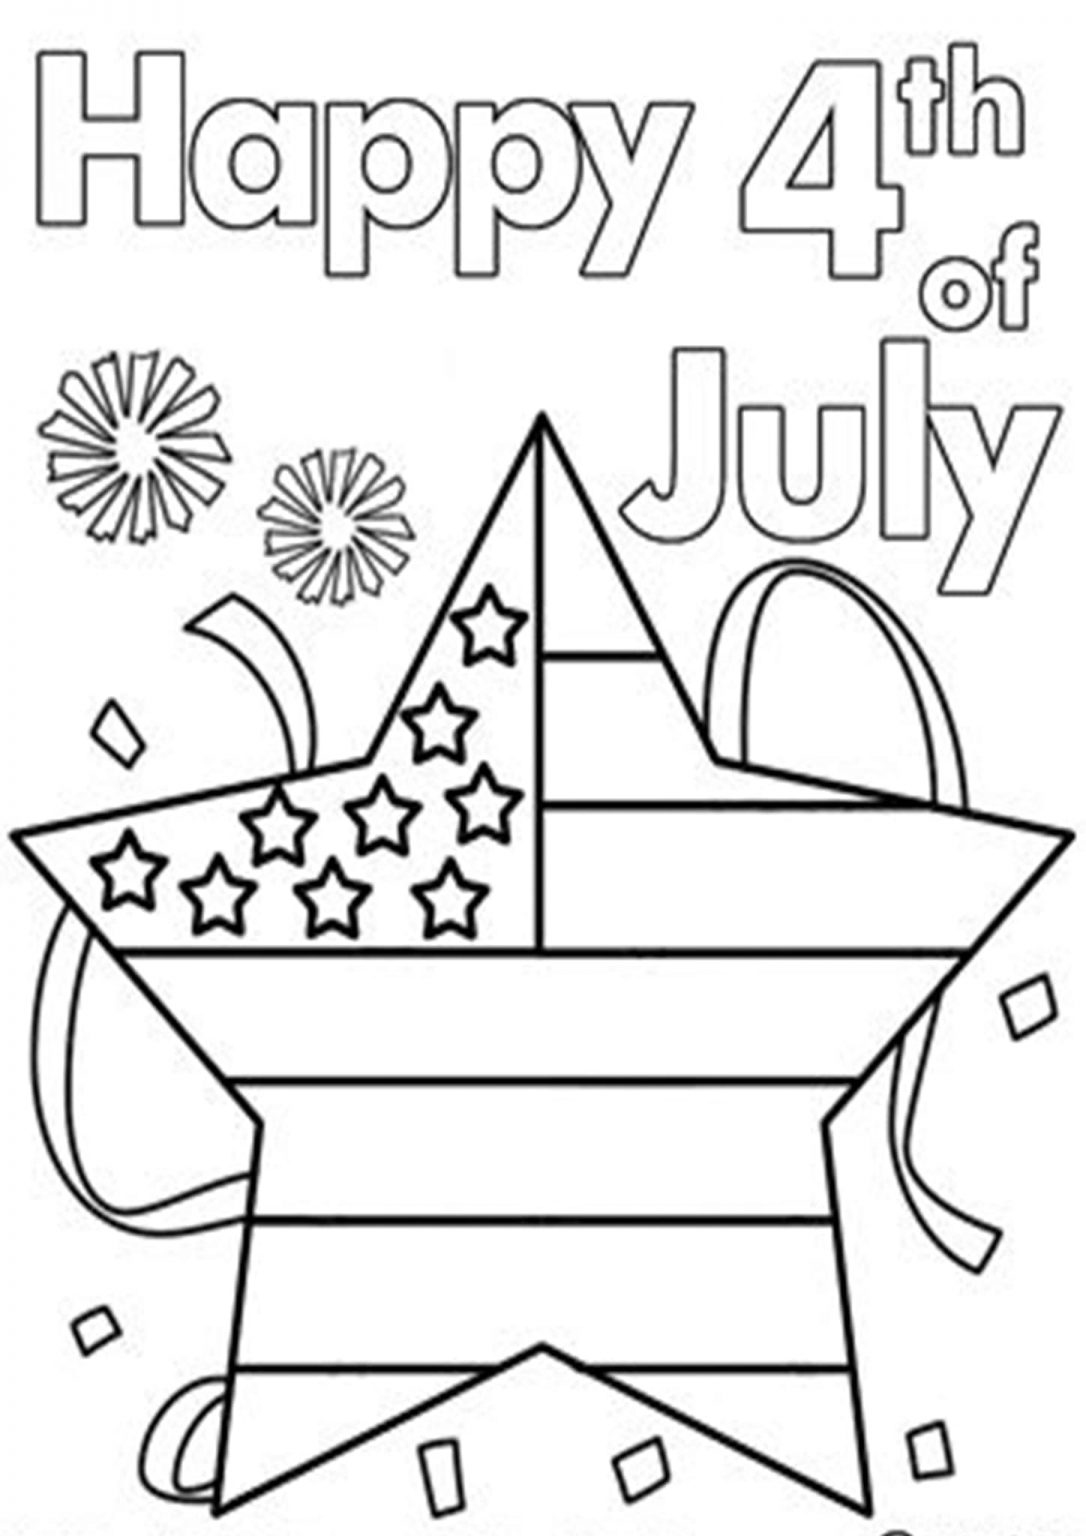 July 4th Coloring Sheets Free Coloring Pages